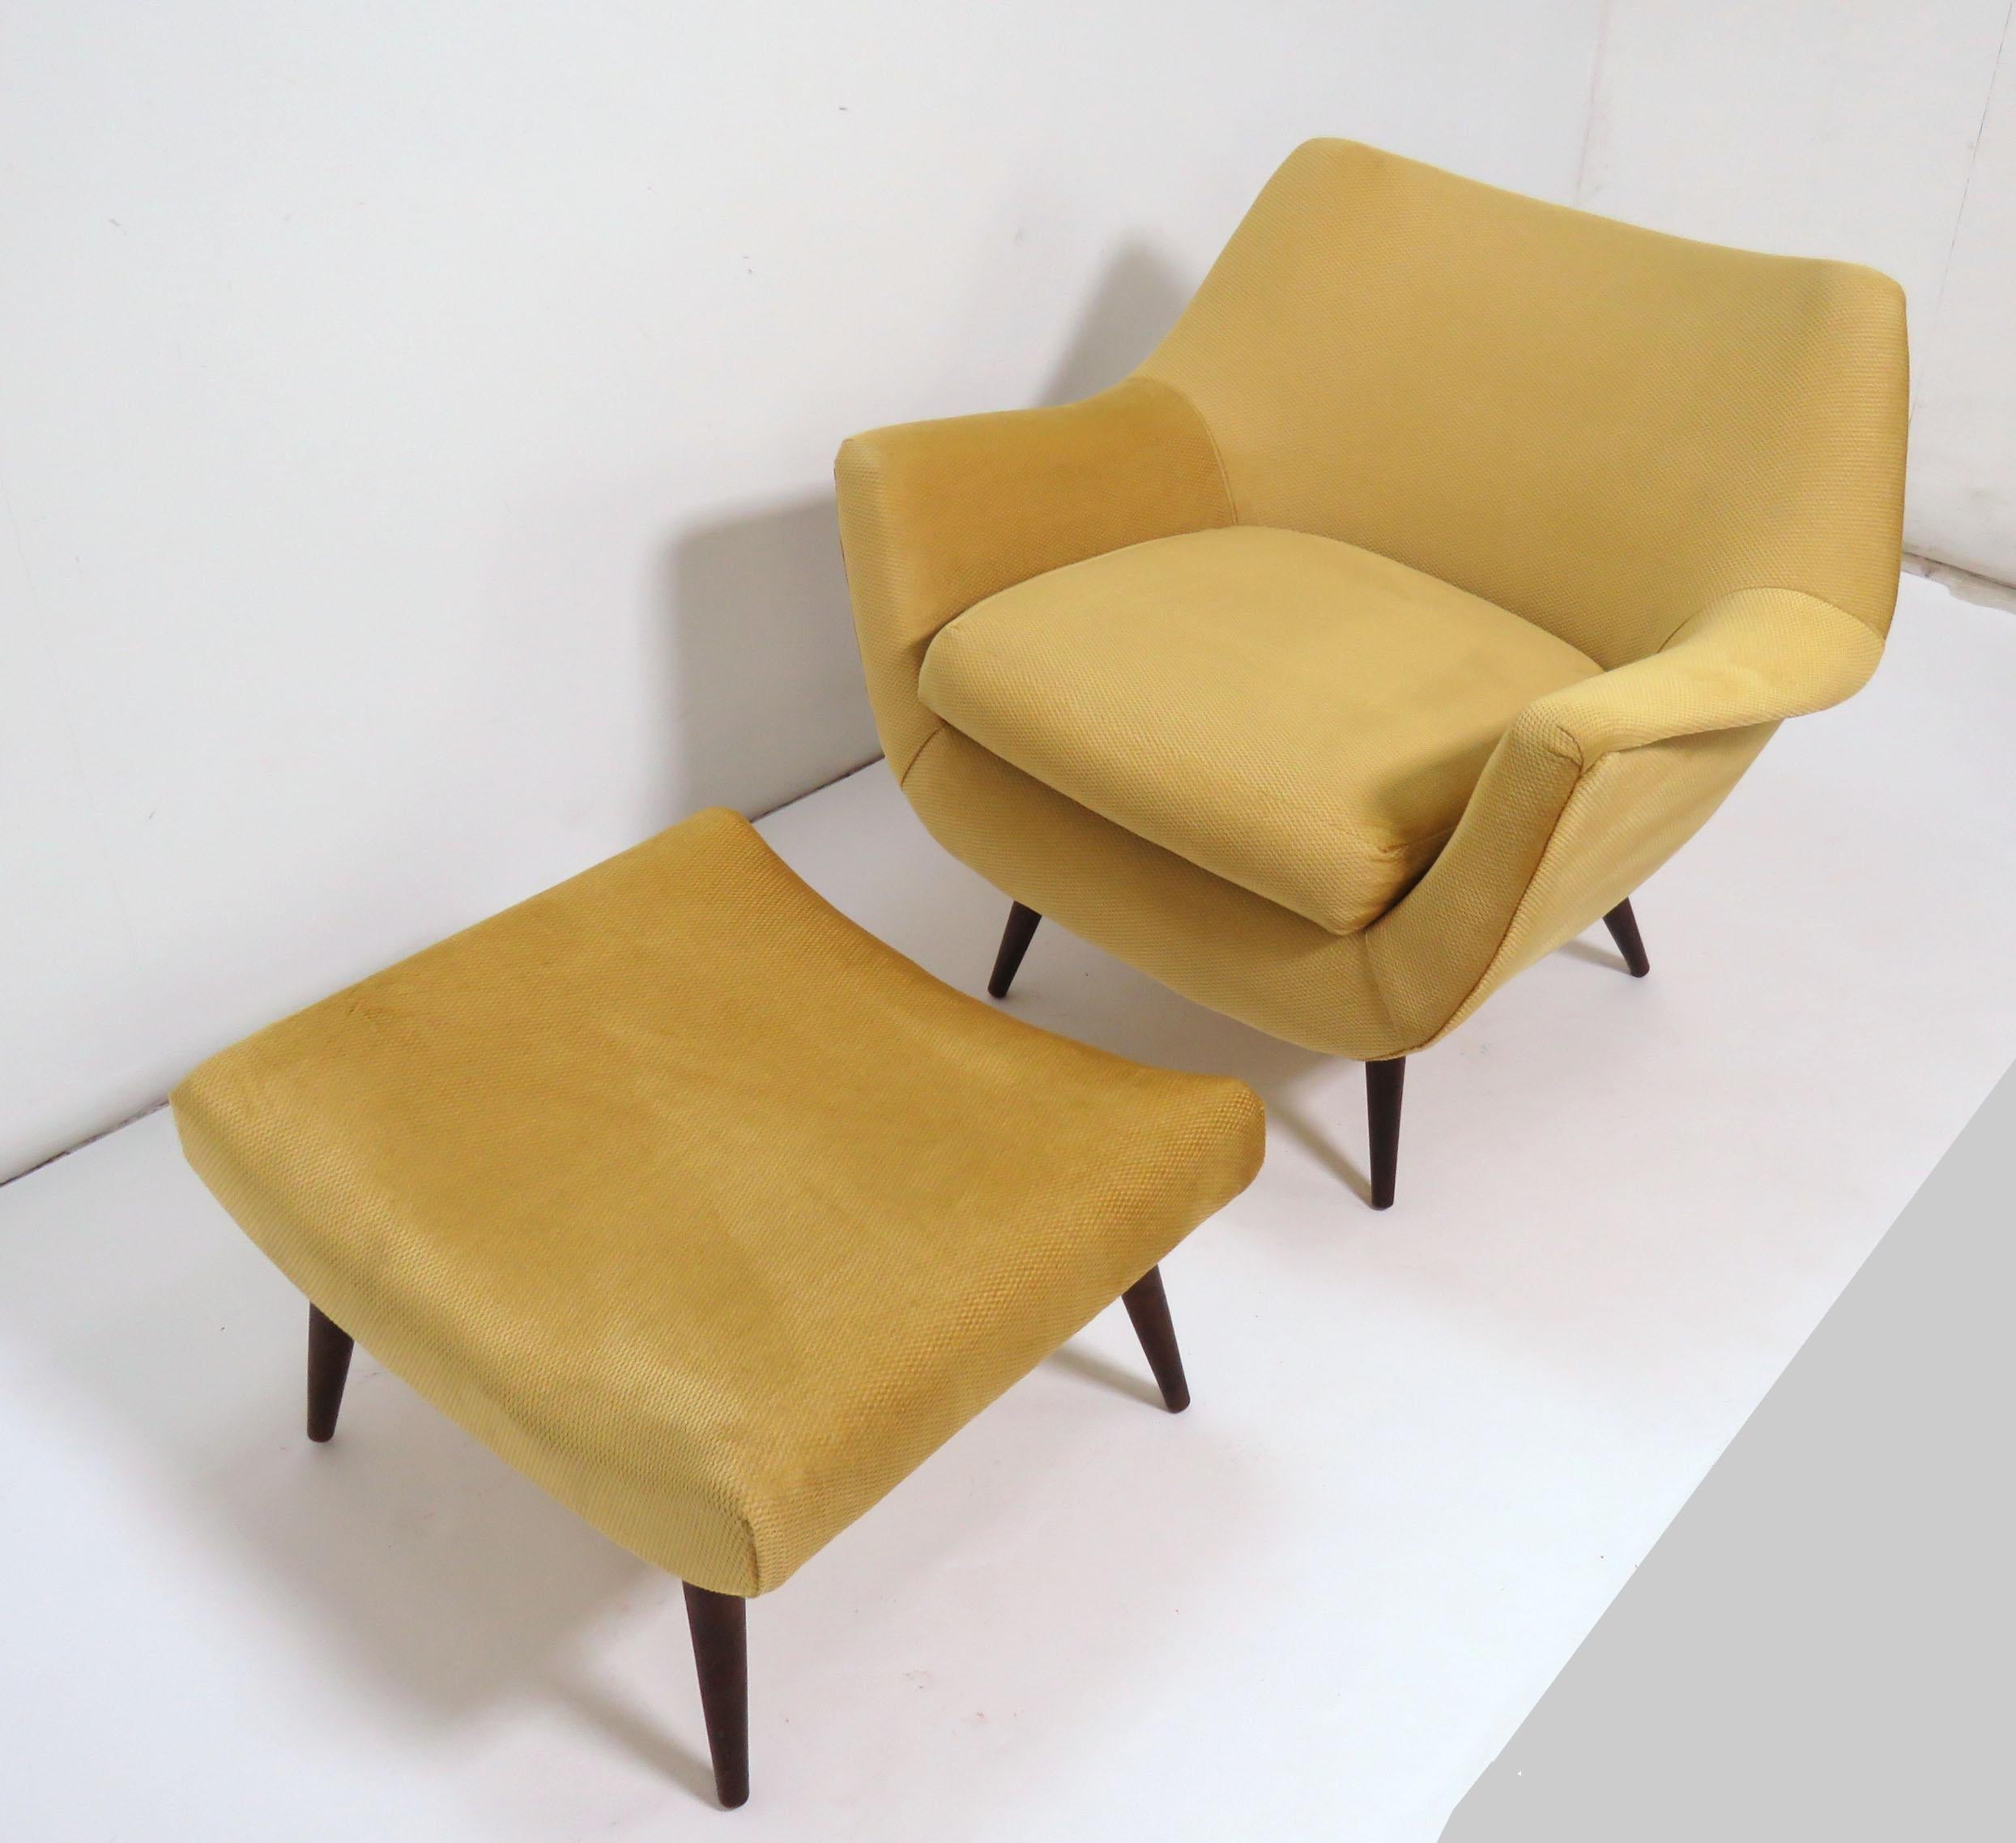 Mid-Century Modern lounge chair and ottoman with voluptuous lines, designed by Lawrence Peabody for the Holiday collection, Selig, circa 1950s. 

Chair measures 35